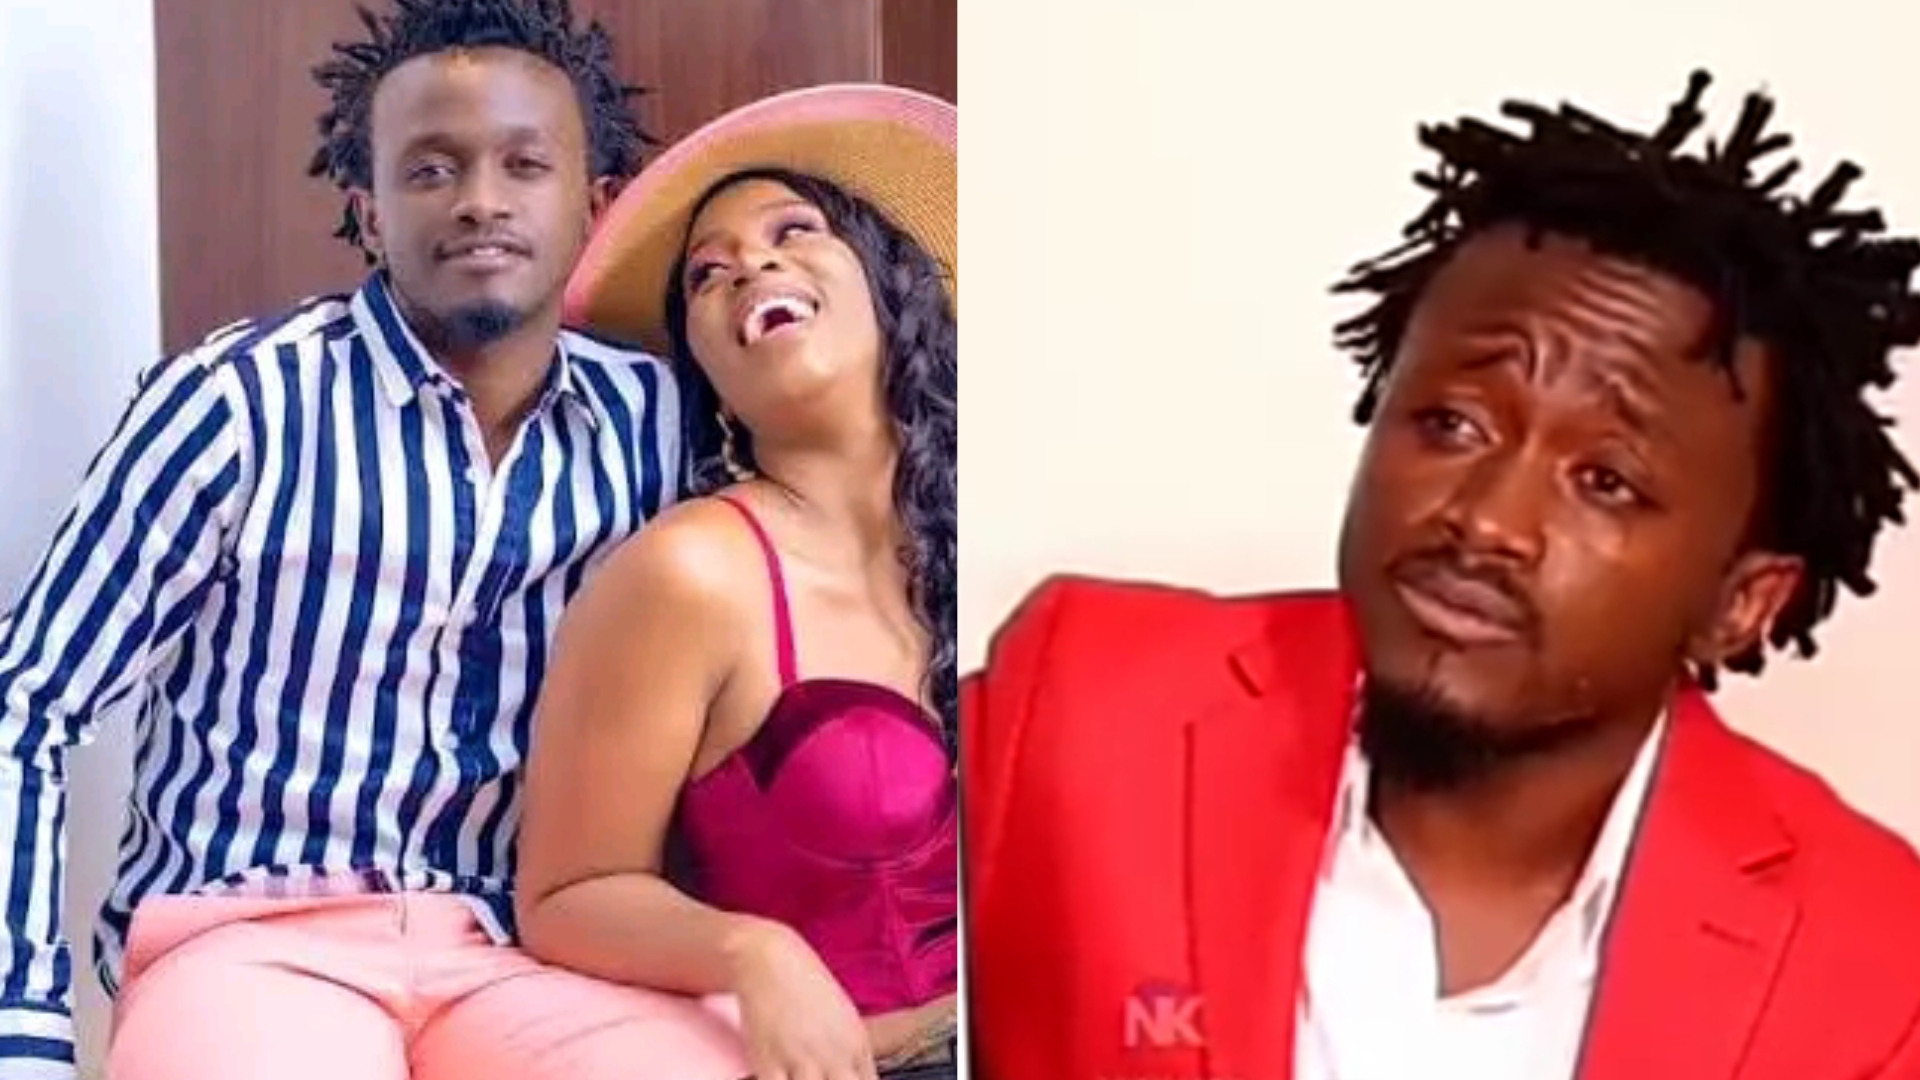 Kenyan Singer Kelvin Kioko affectionately known as Bahati sparked wild reactions among Netizens after he declared that he will only be showering twice a week. Bahati made the declaration after his wife Diana Marua exposed him through her YouTube Channel. Marua said that her bathing towel turns brown every time they shower together. "Every time nikimpeleka kwa bafu alafu nimsugue na kitambaa ya yangu Wa white, inaturn brown," Marua lamented. Responding to the claims, Bahati admitted having trouble with showering every day. Rather Bahati said that he should be allowed to take a bath only on Tuesdays and Fridays as those are the only important days. “I accept. Mimi kuoga ni shida. Nataka tuelewane, nitakua naoga mara mbili kwa wiki. Friday juu naingia events weekend, Tuesday juu the rest of the week niko hapa na wewe. Mimi nataka ujue mimi si cabbage siwezi shinda kwa maji.” he said. In a separate scene, Bahati shared that having hard time bathing has affected his skin complexion. ” Mimi nmekubali mimi kuoga ni shida. Mi hata sahi ningekua mweupe.” he added. Diana made a joke about how he would only take a shower since he was heading to events where women would be touching him. While reacting to the video, Kenyans expressed mixed reactions, with some arguing that the content was irrelevant to them. However, some of the fan's agreed with Bahati assertion, adding bathing twice a week is more than enough for man. "Mara mbili no show off. Mwanaume anafaa kuoga Mara moja kwa wiki," a fan wrote.